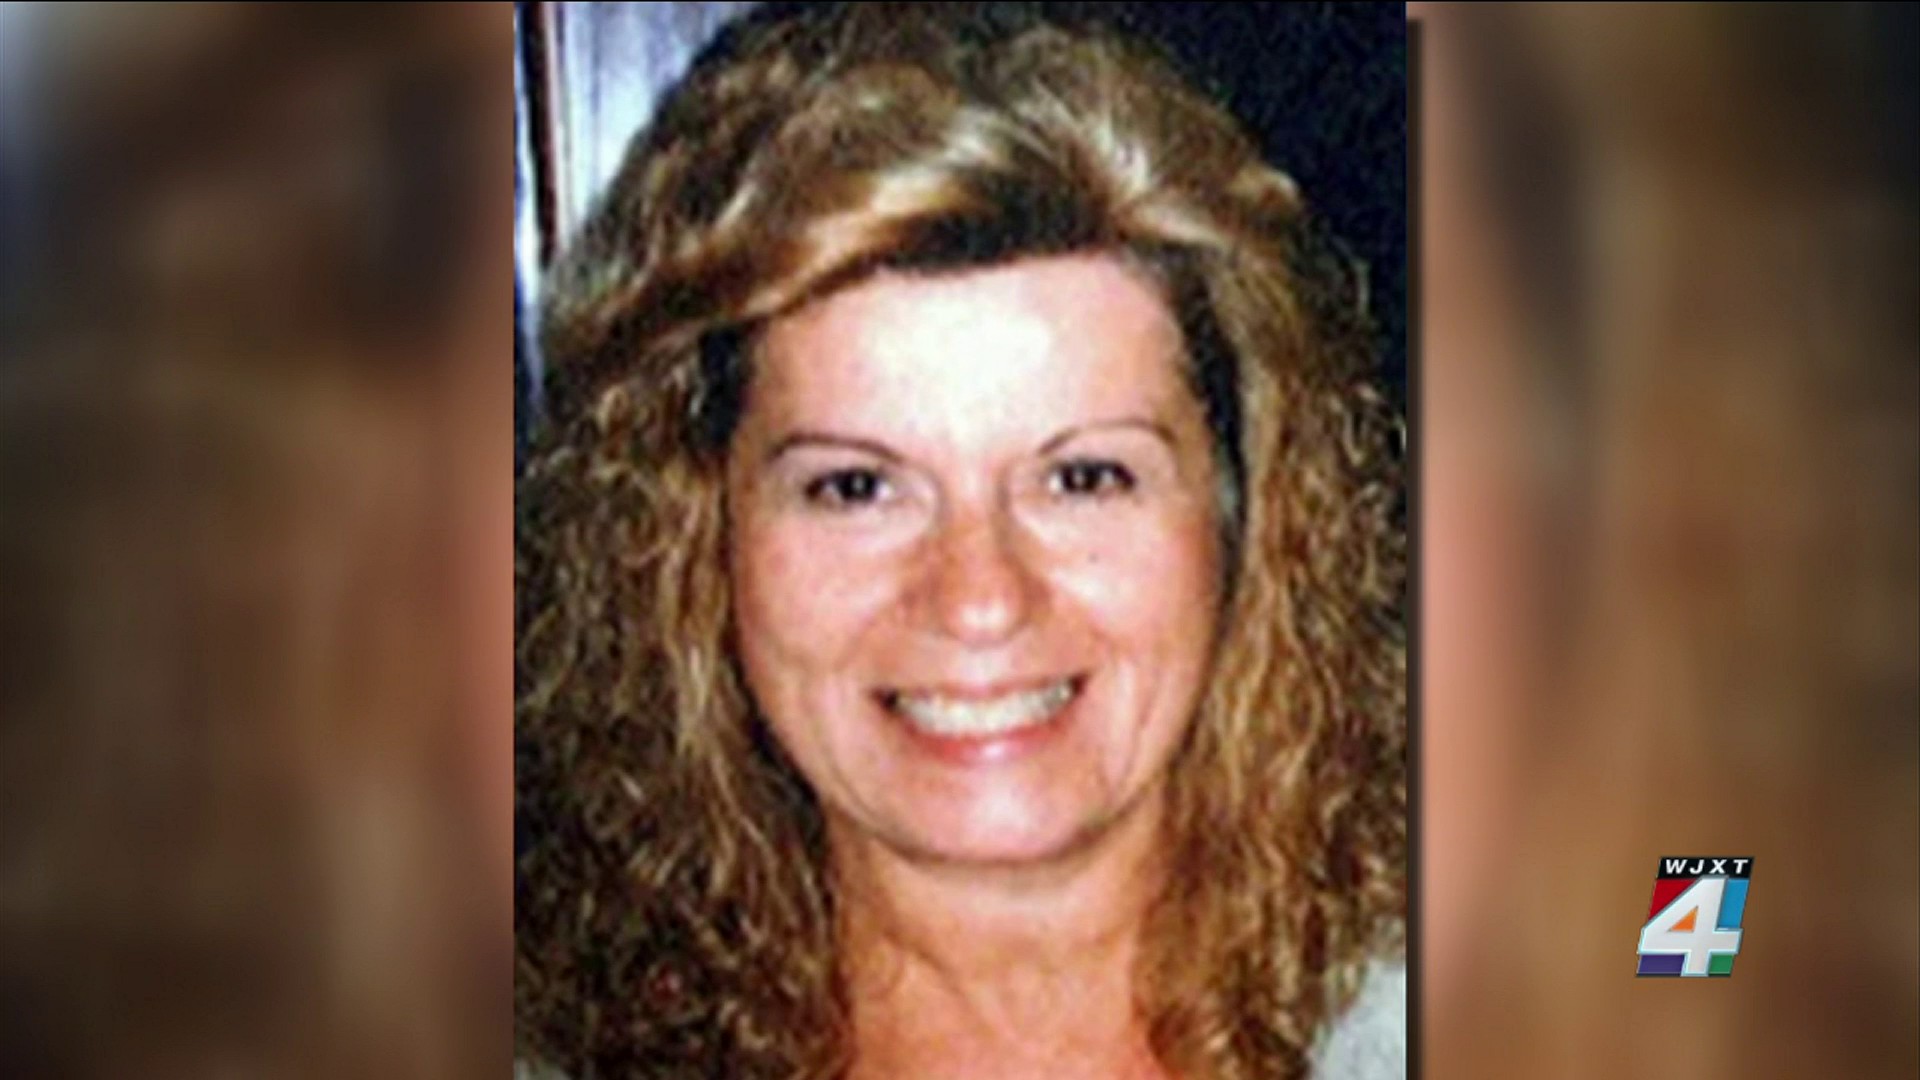 Nassau County detectives release video in 22-year cold case investigation of missing woman photo